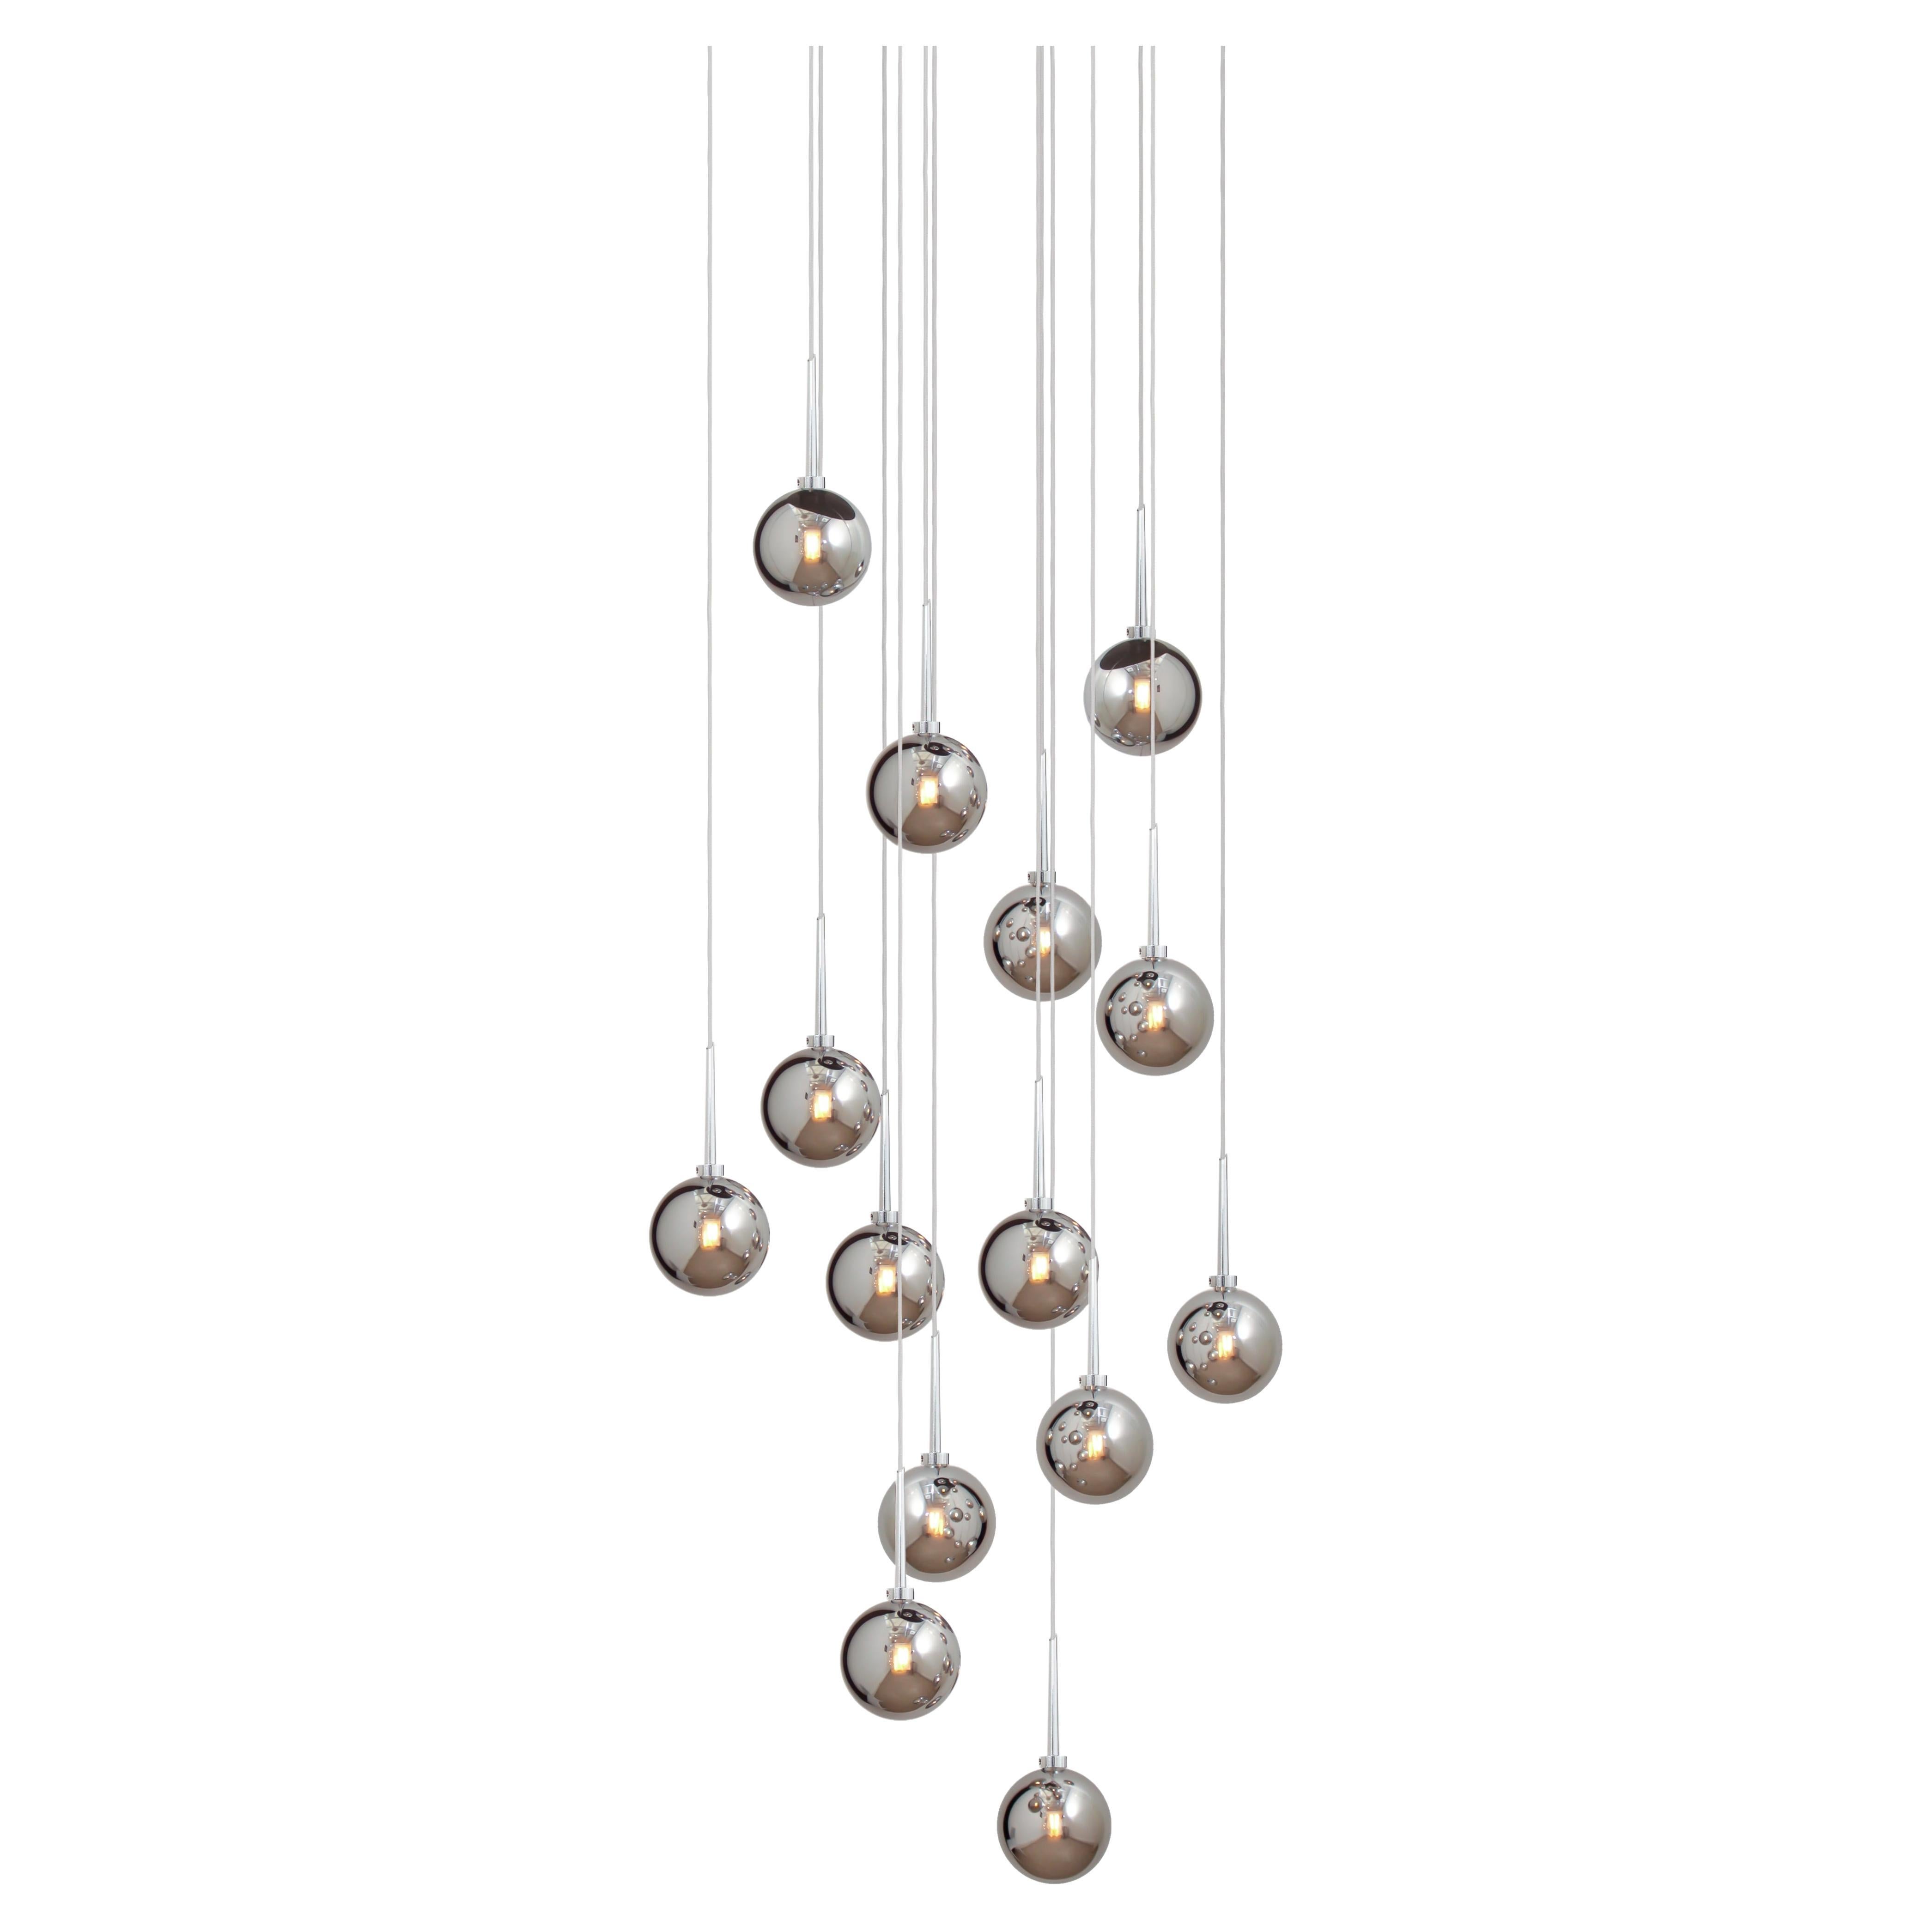 Sweety Blown Glass Pendant Light by Concept Verre